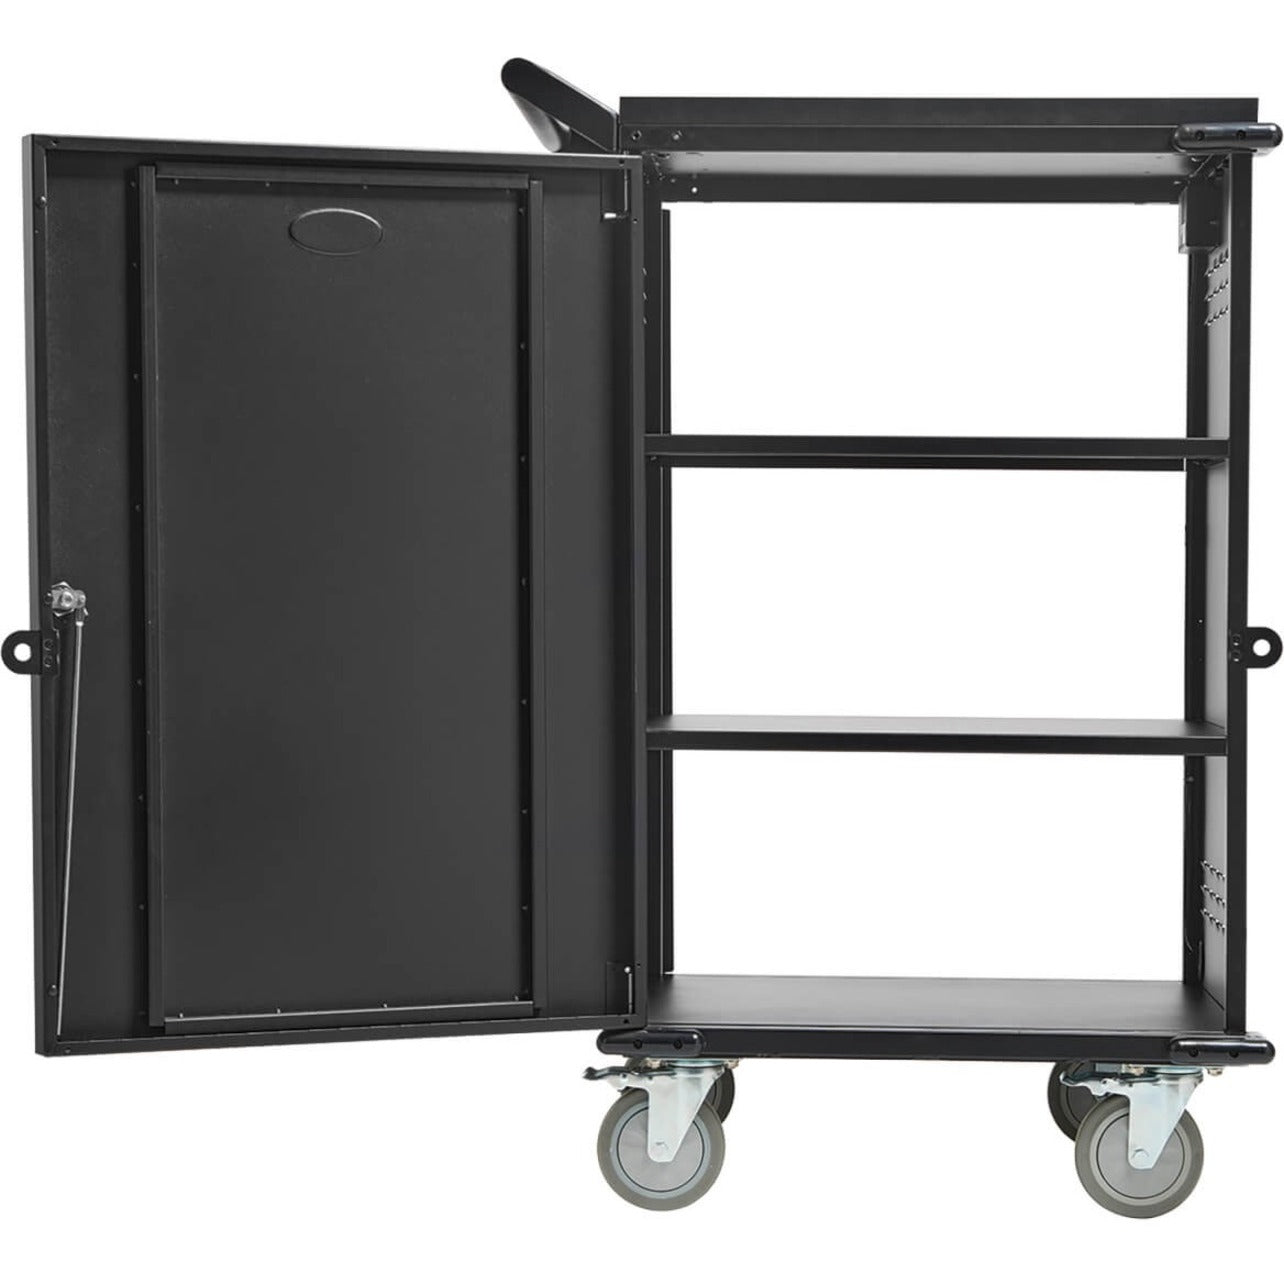 Tripp Lite CSCSTORAGE1 Locking Storage Cart for Mobile Devices and AV Equipment - Black, Anti-theft, Mobility, Key Lock